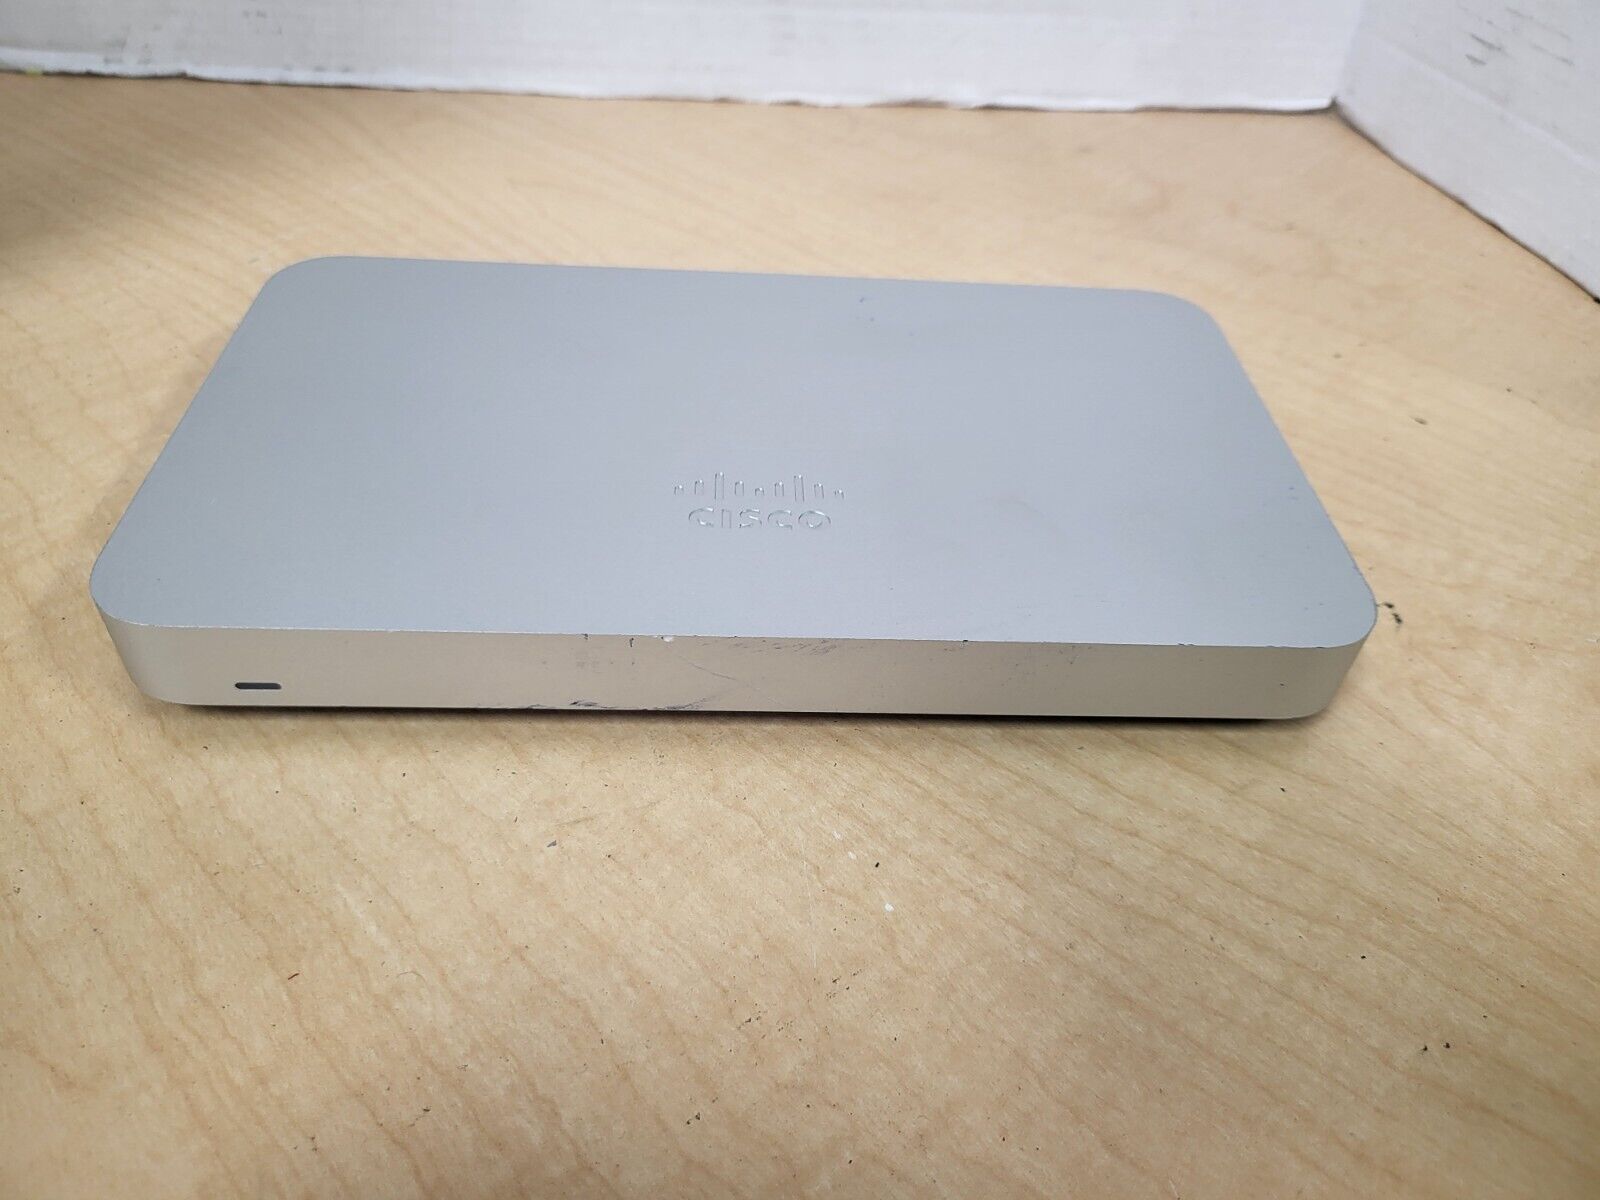 Cisco Meraki MX64-HW 4-Port Cloud Managed Firewall and Router Security Appliance